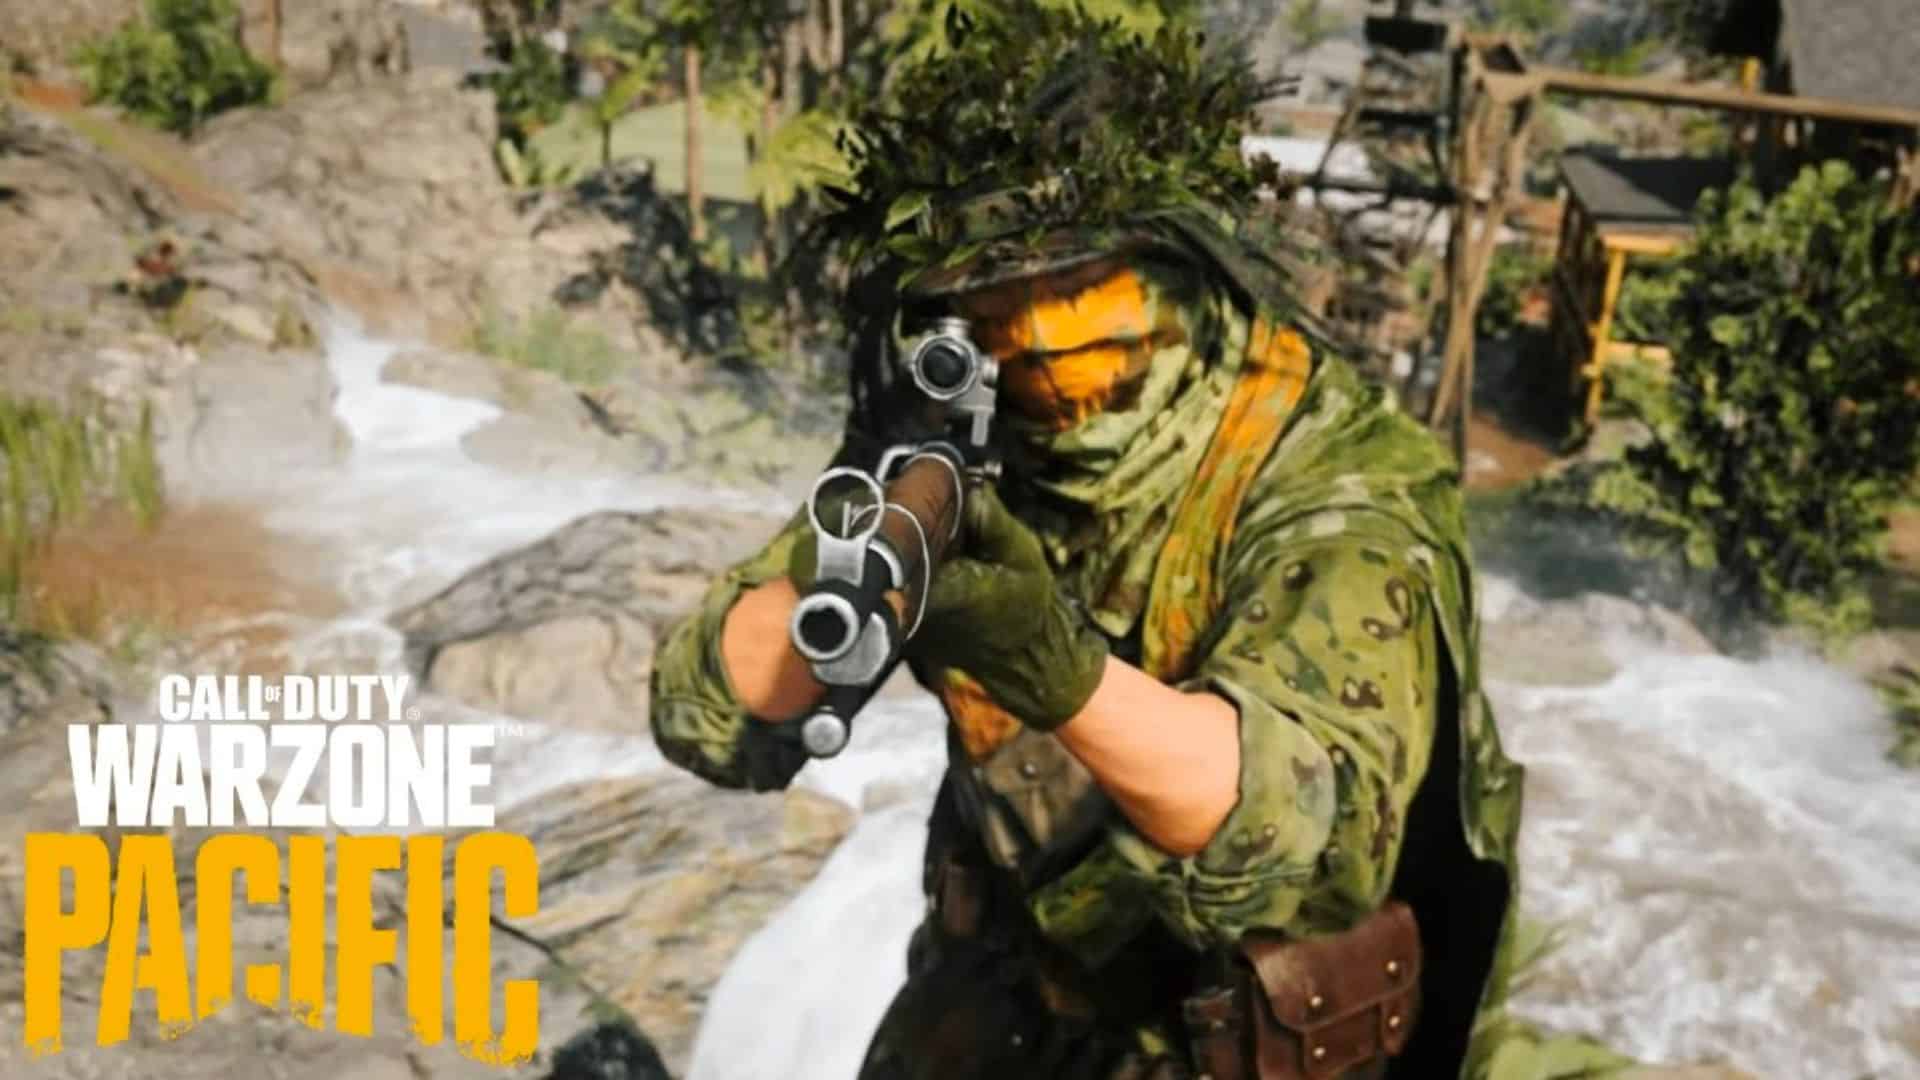 Call of Duty: Vanguard character in leafy cover holding sniper rifle